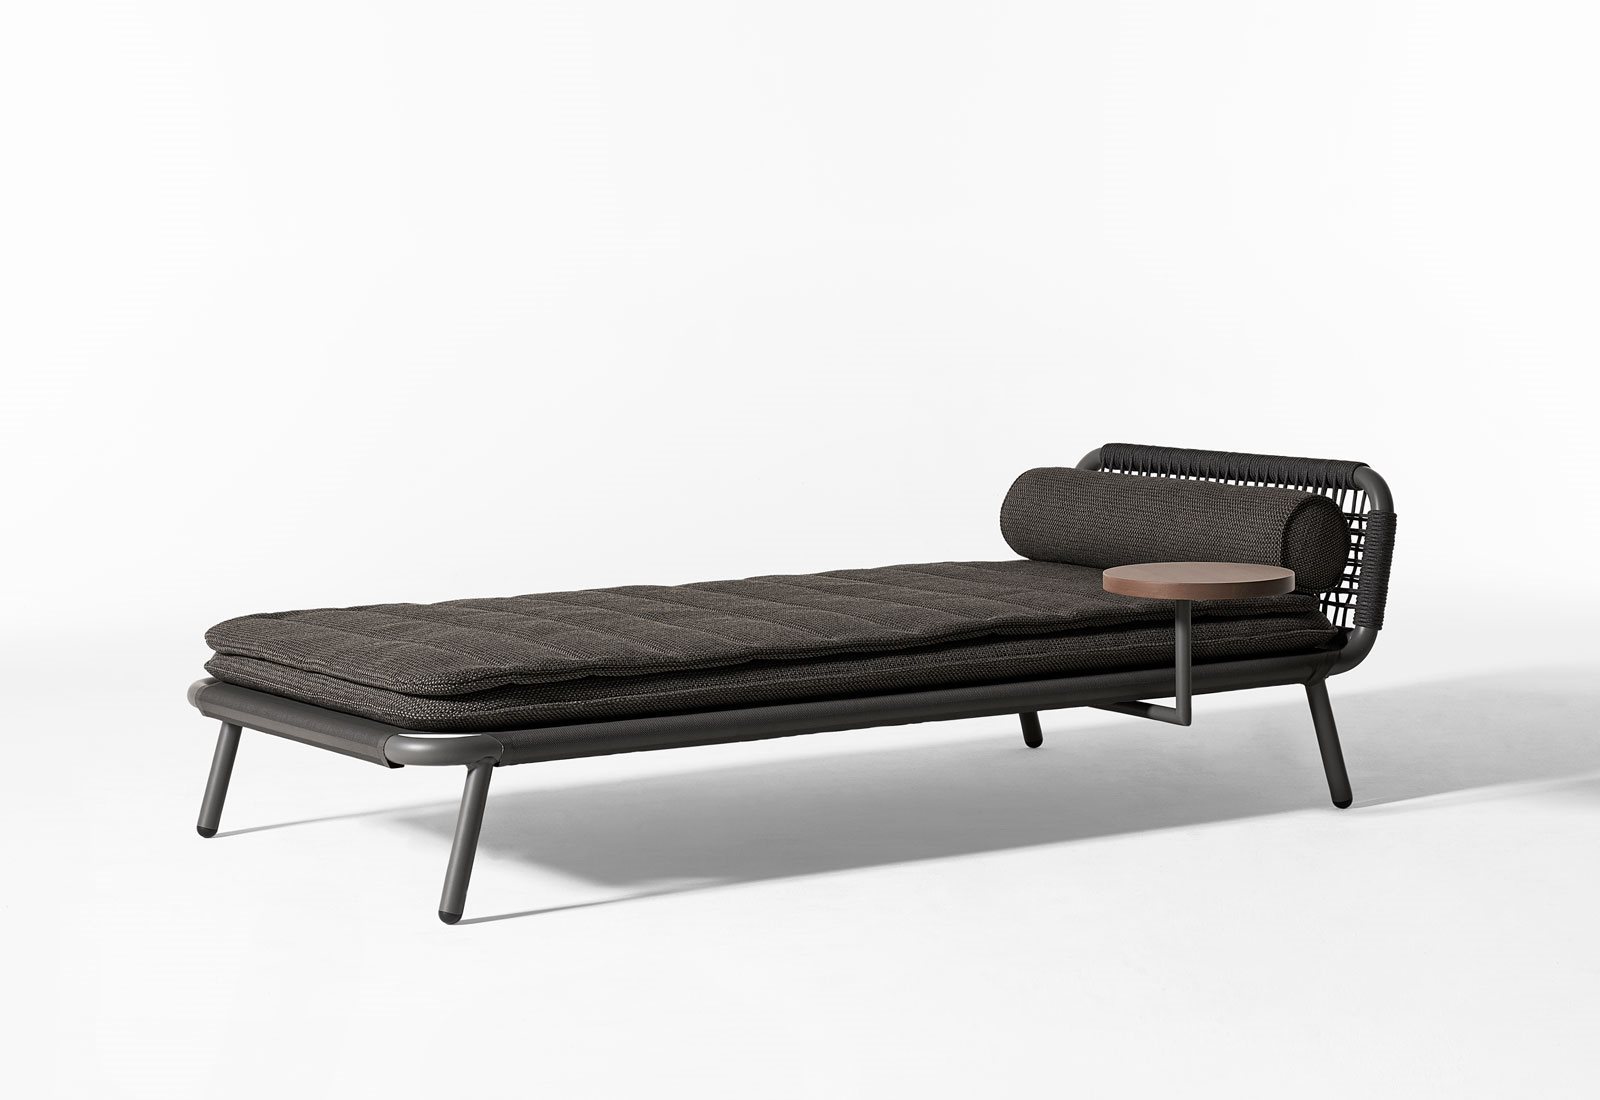 Noa-open-air-lounge-bed-03-1600x1100